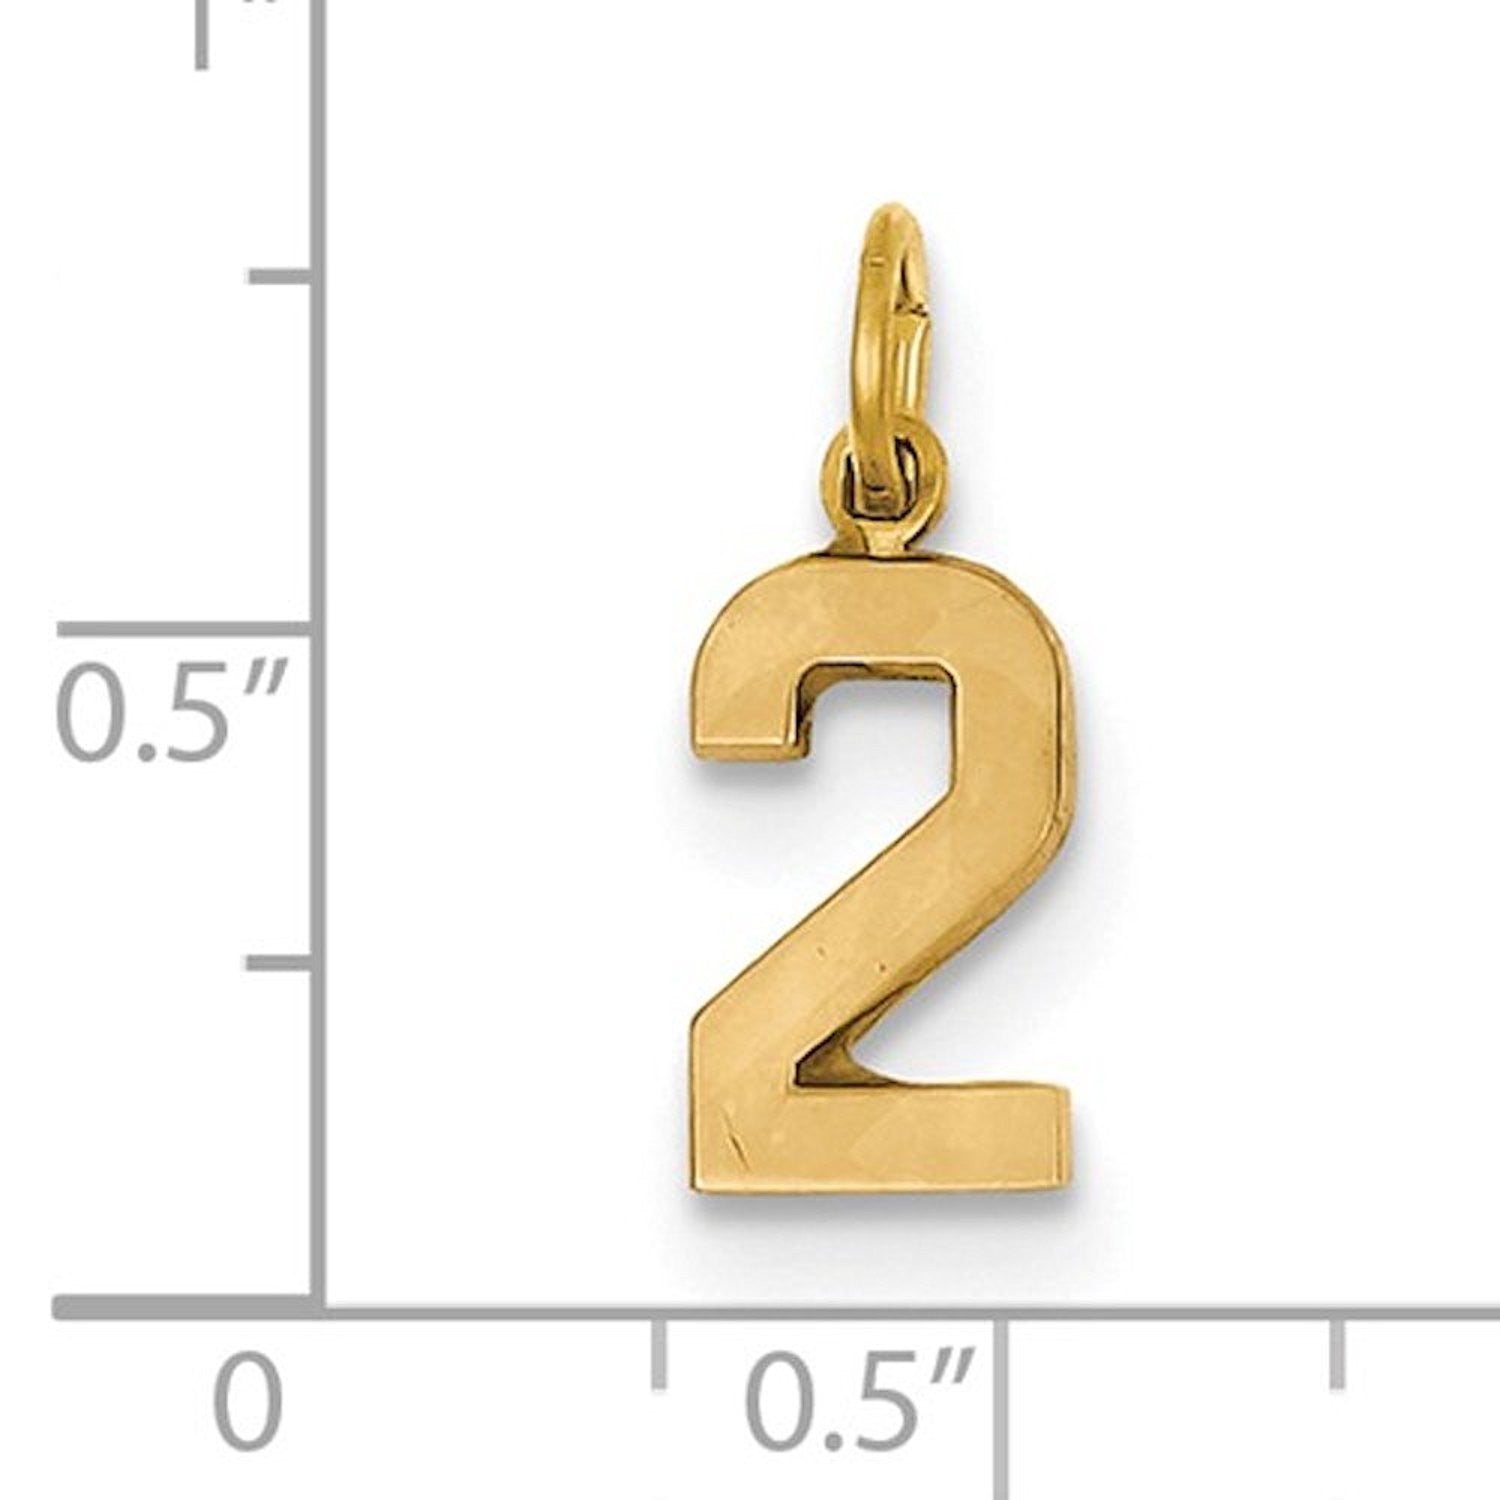 14k Yellow Gold Number 2 Two Pendant Charm